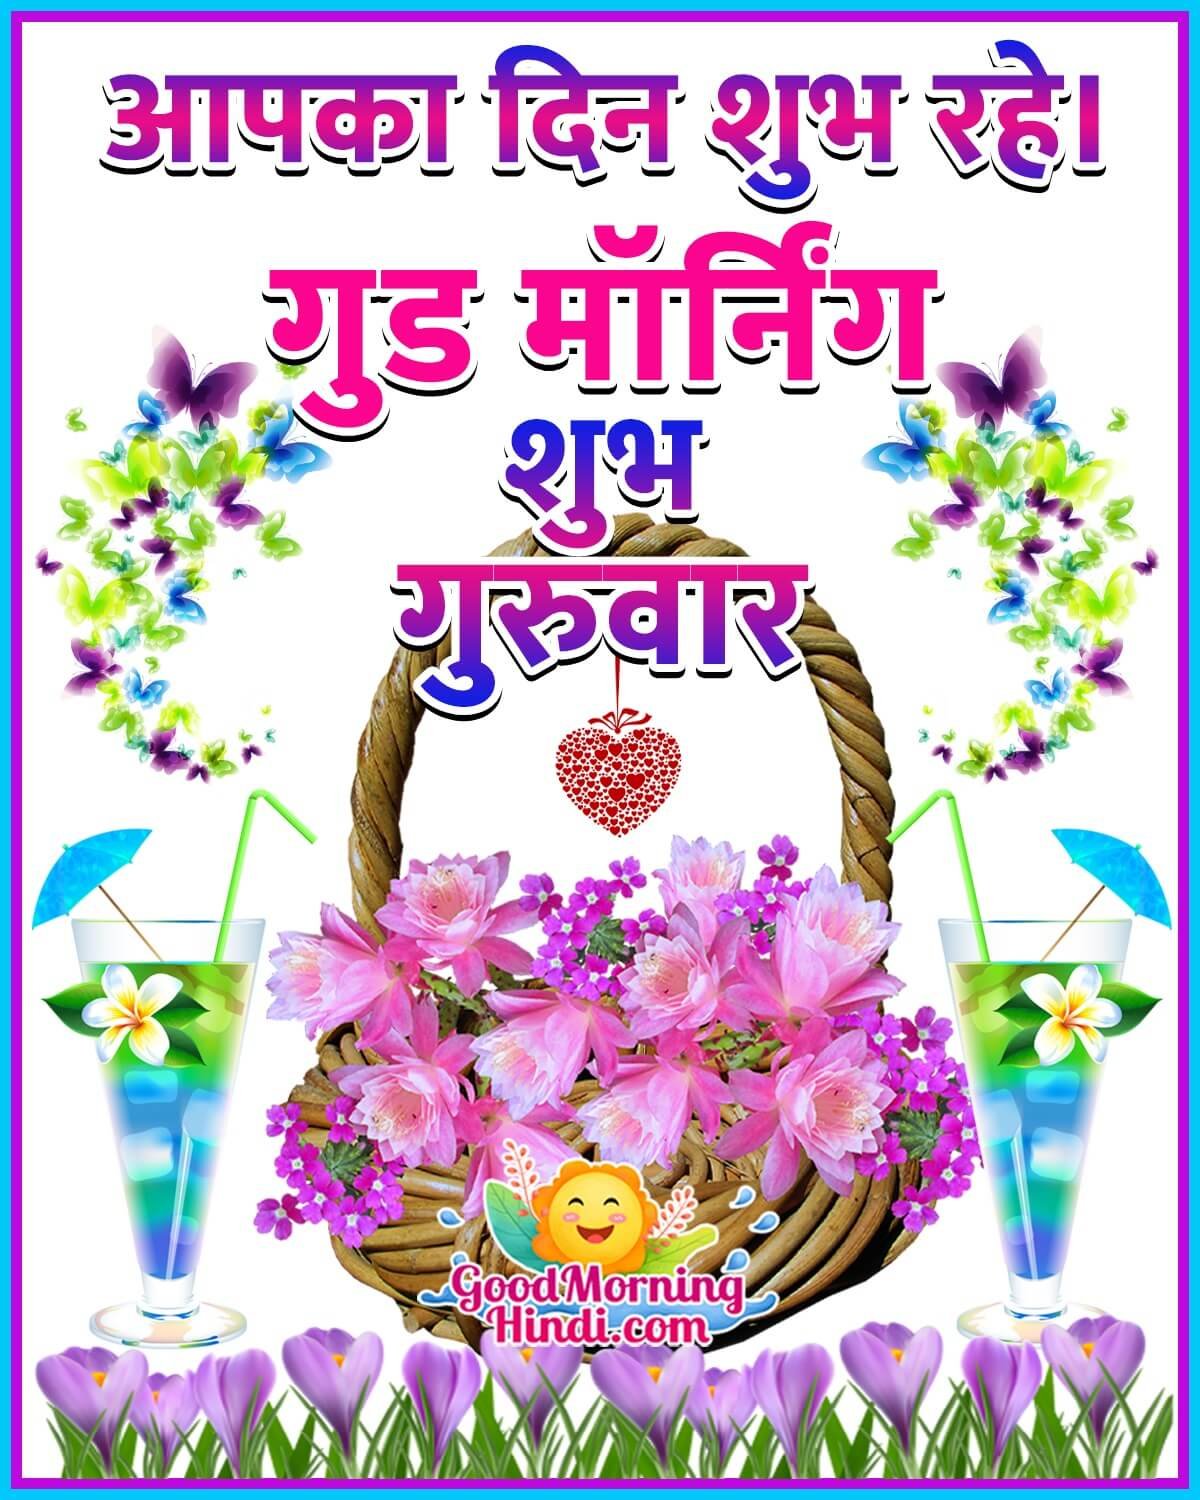 Good Morning Happy Thursday Images In Hindi